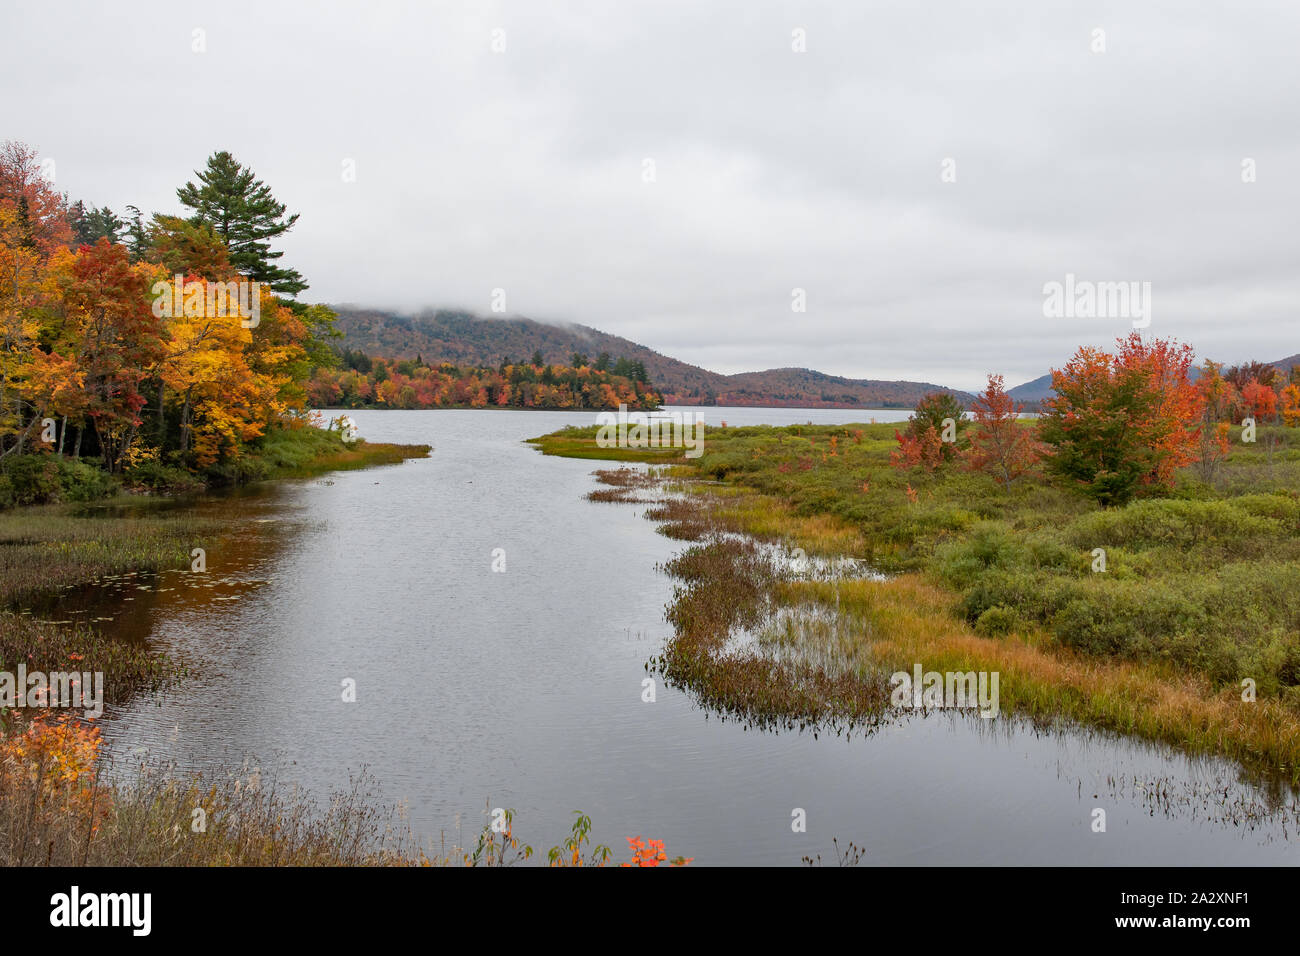 A view of Lewey Lake in the Adirondack Mountains, NY USA in autumn on a rainy misty day. Stock Photo